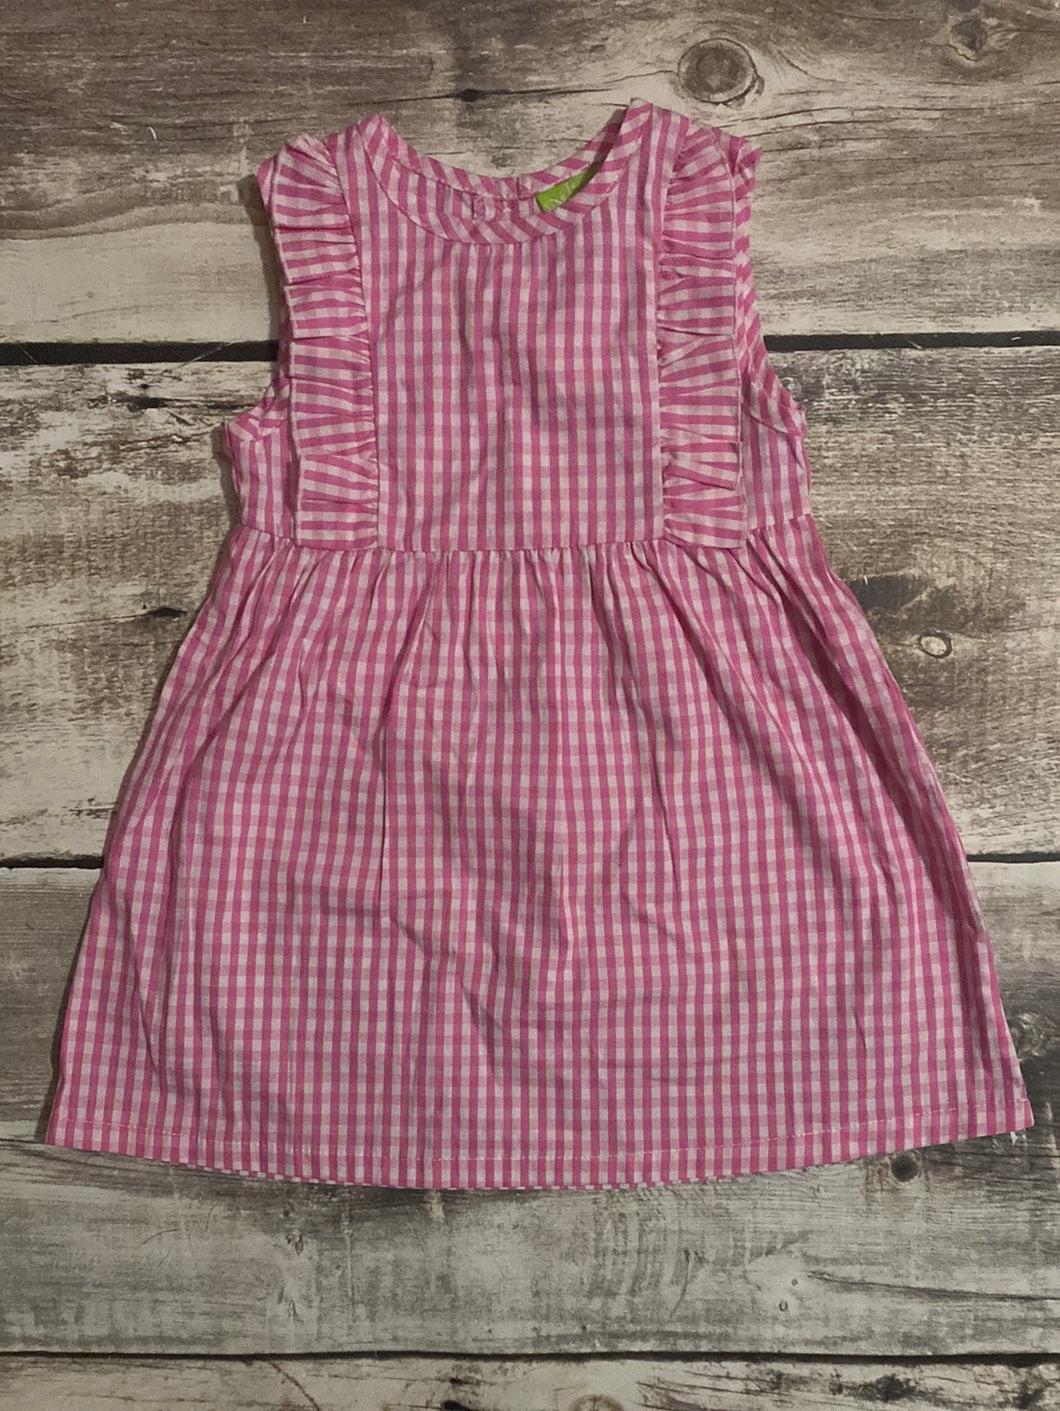 Classic Whimsy size 2t dress